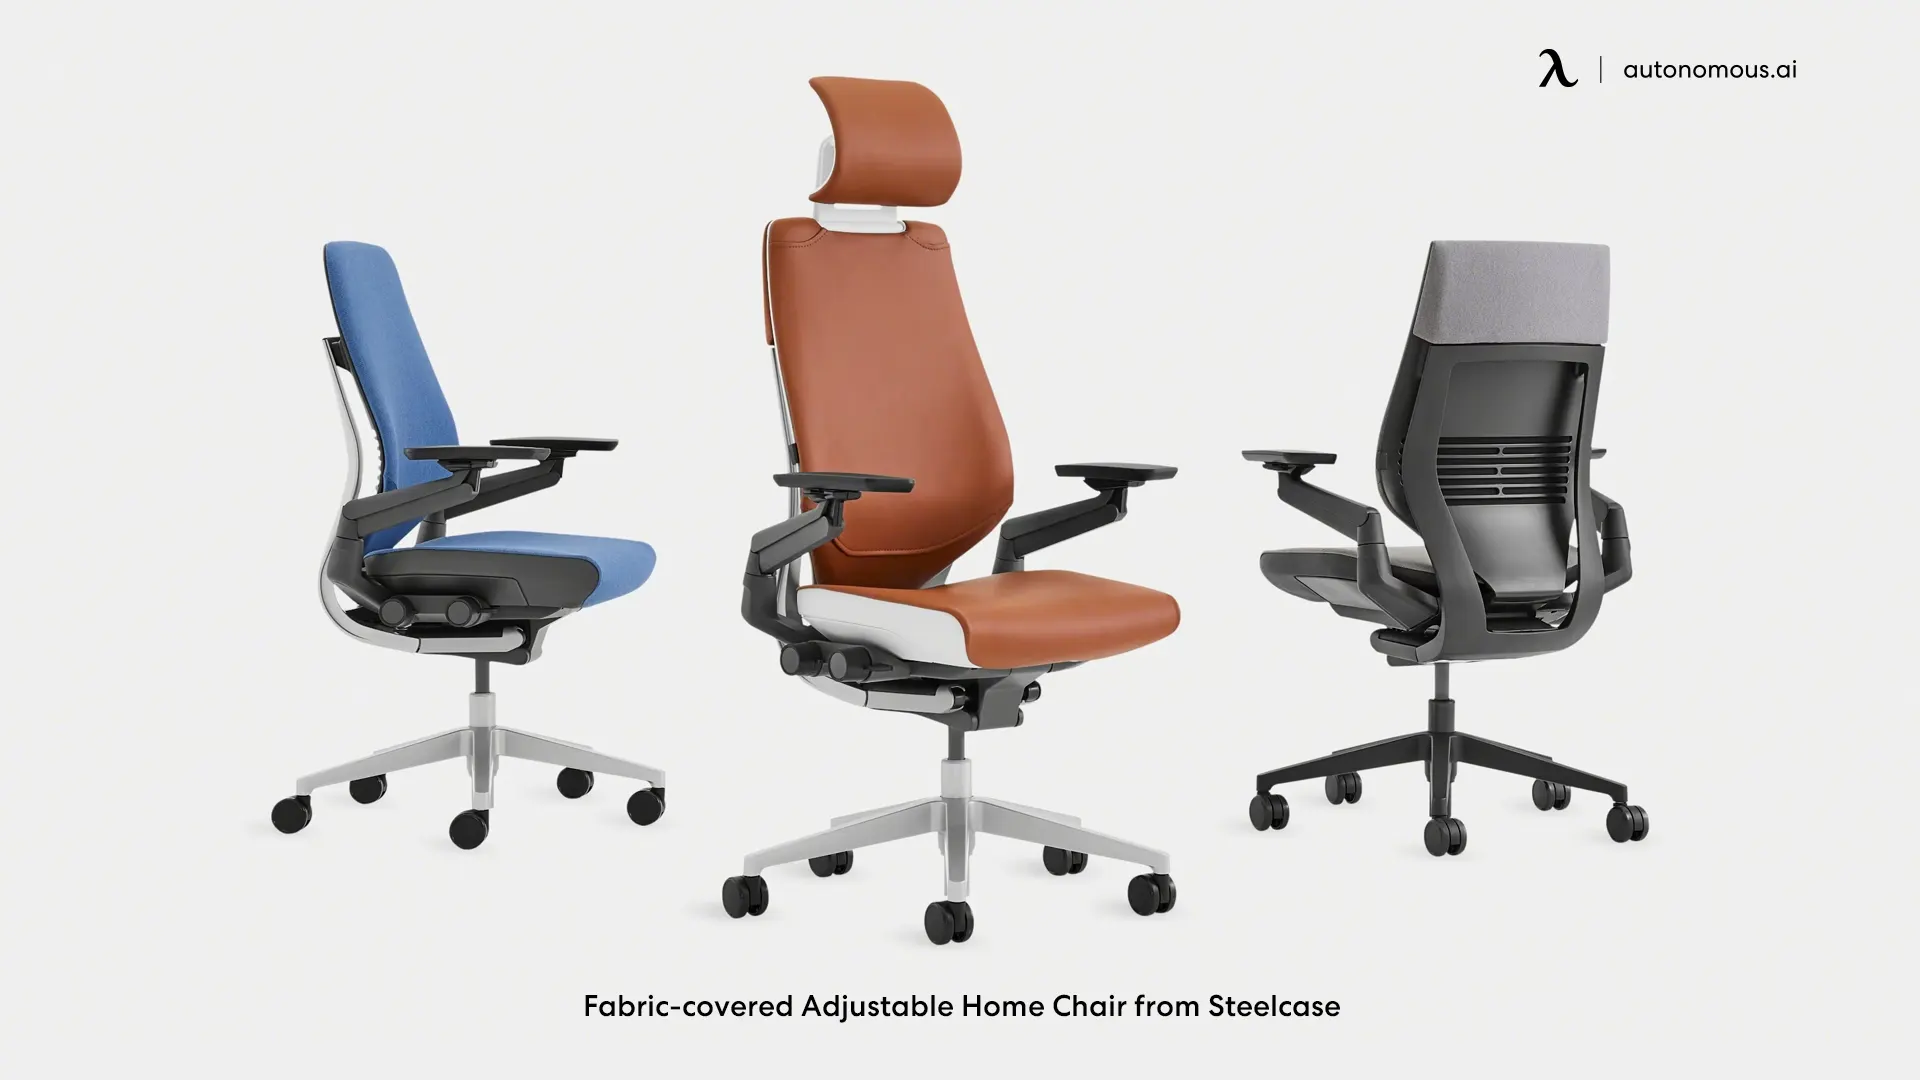 Fabric-covered Adjustable Home Chair from Steelcase